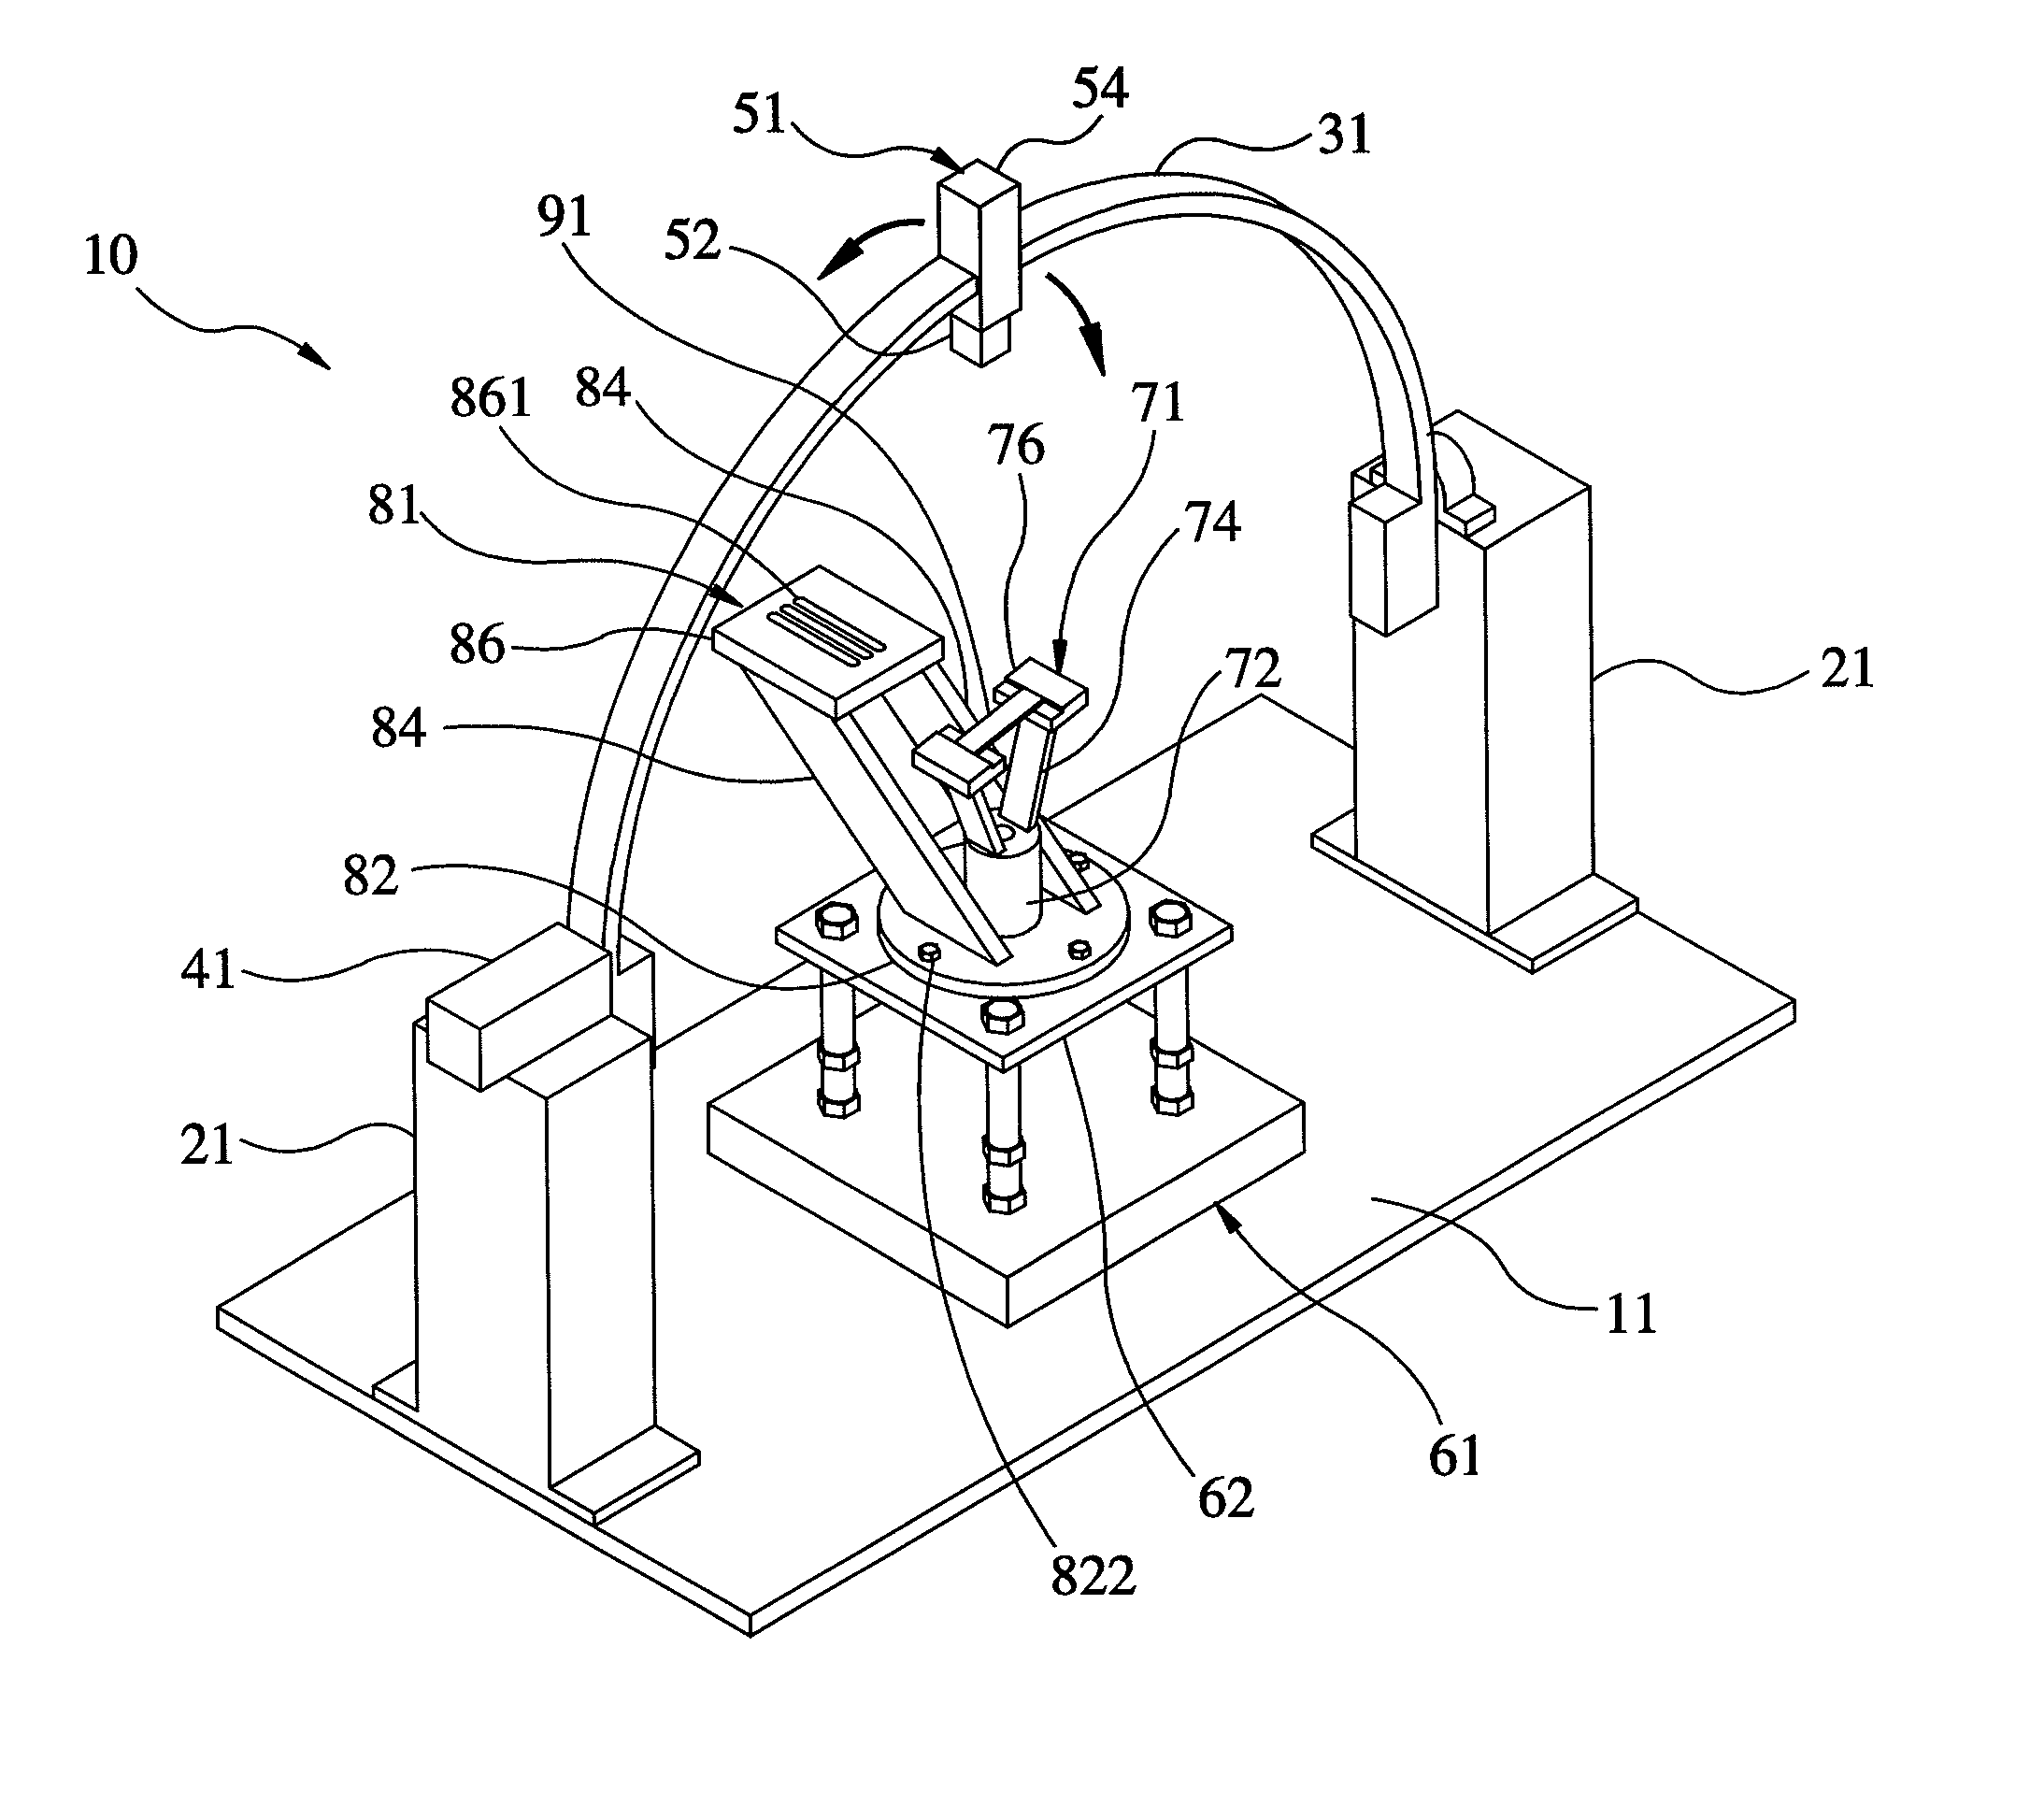 High-frequency chip antenna measurement system